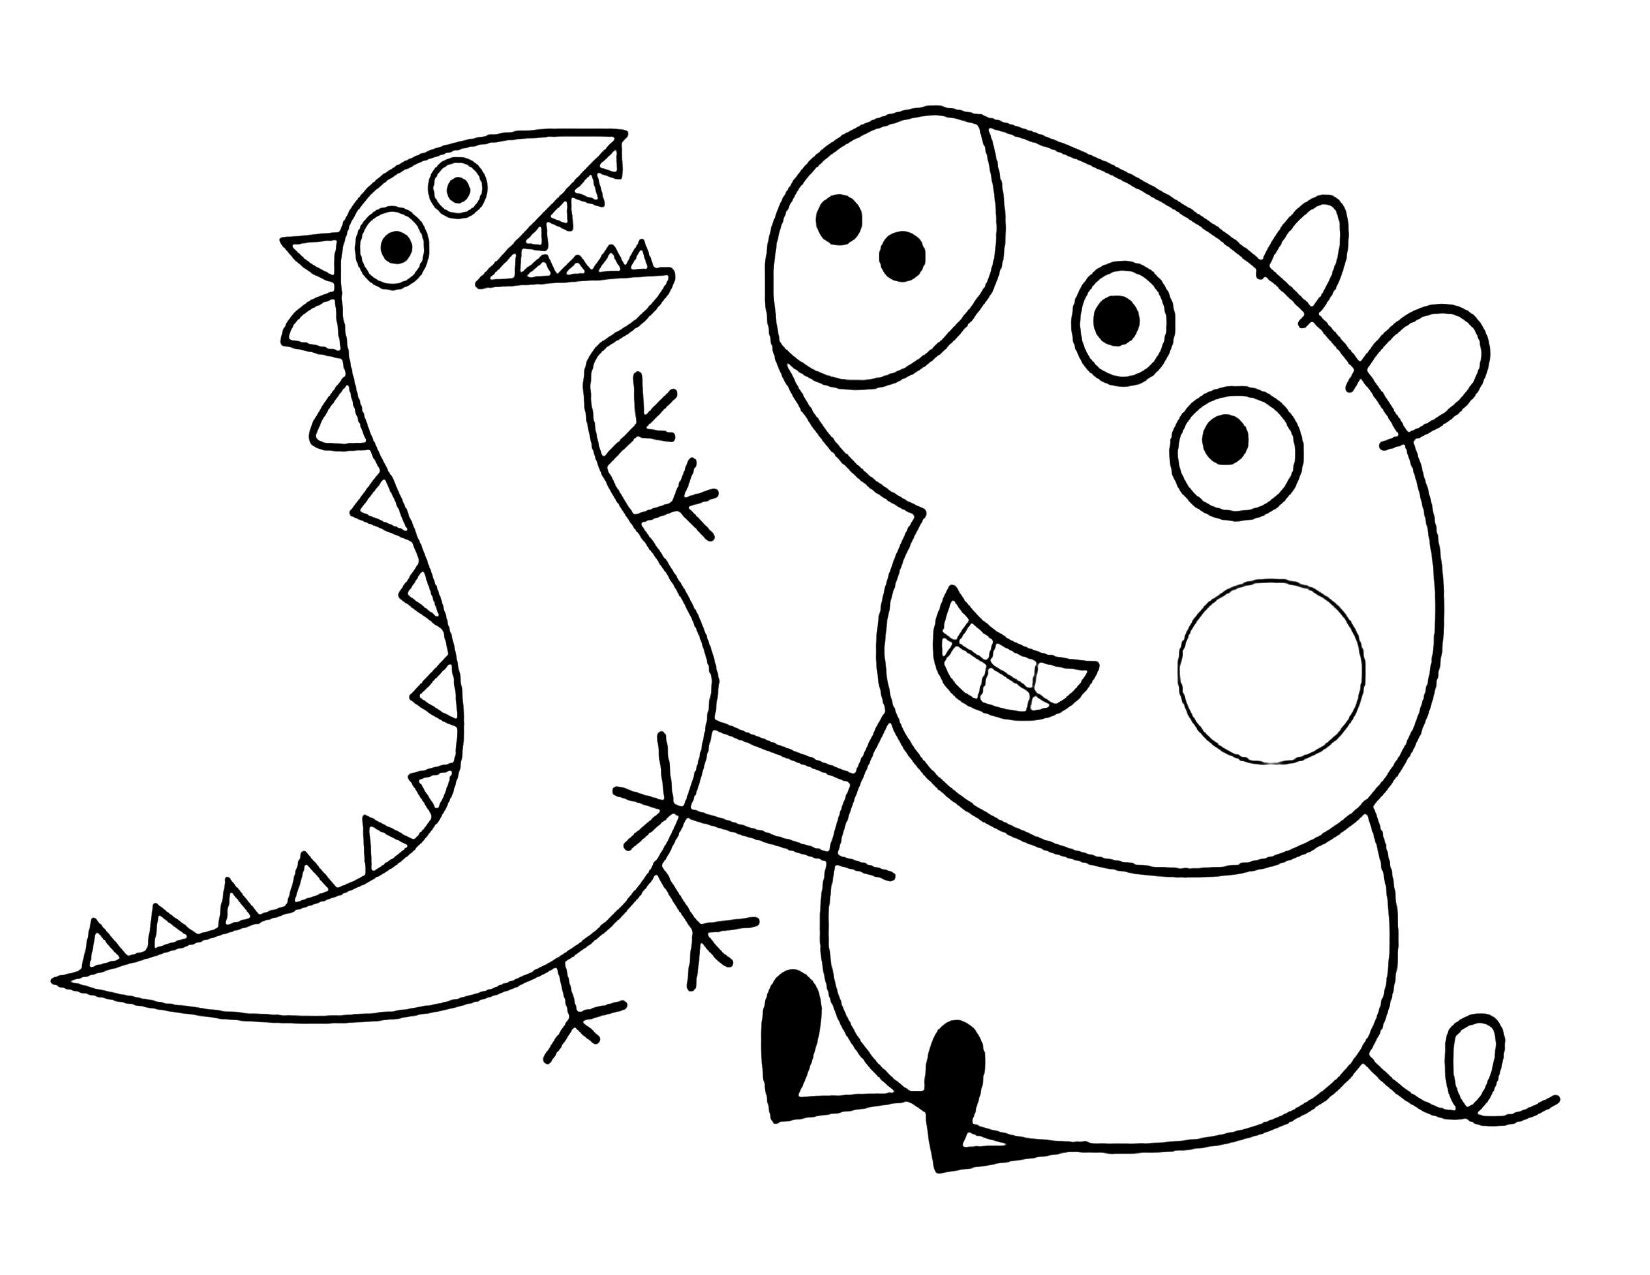 Peppa Pig Coloring Pages easy for kids - SheetalColor.com